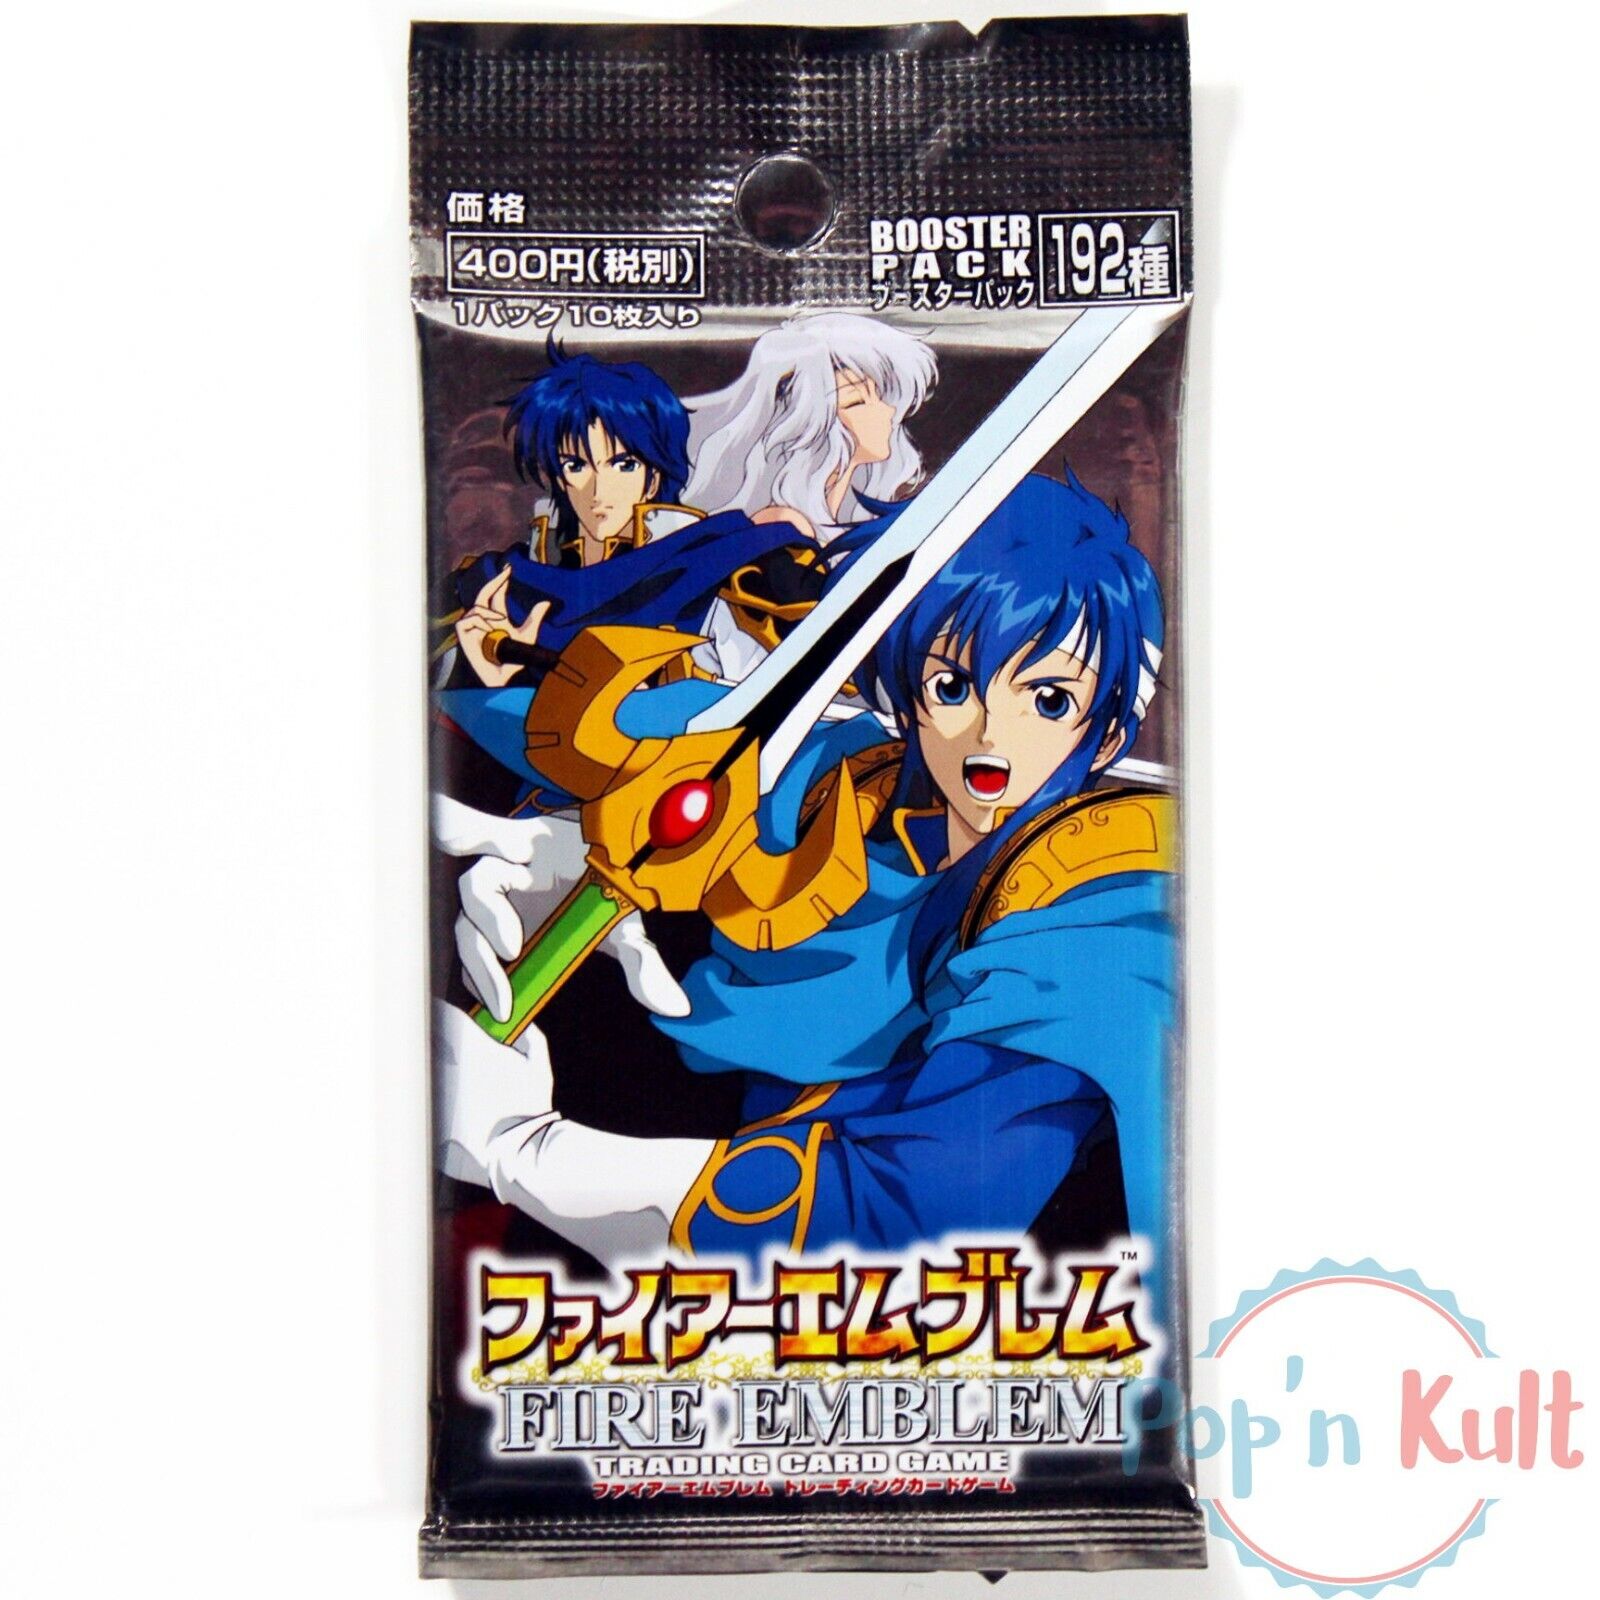 1 x Fire Emblem Booster Pack: Trading Card Game - Series 1 - 2001 [JAPAN] TCG NEW